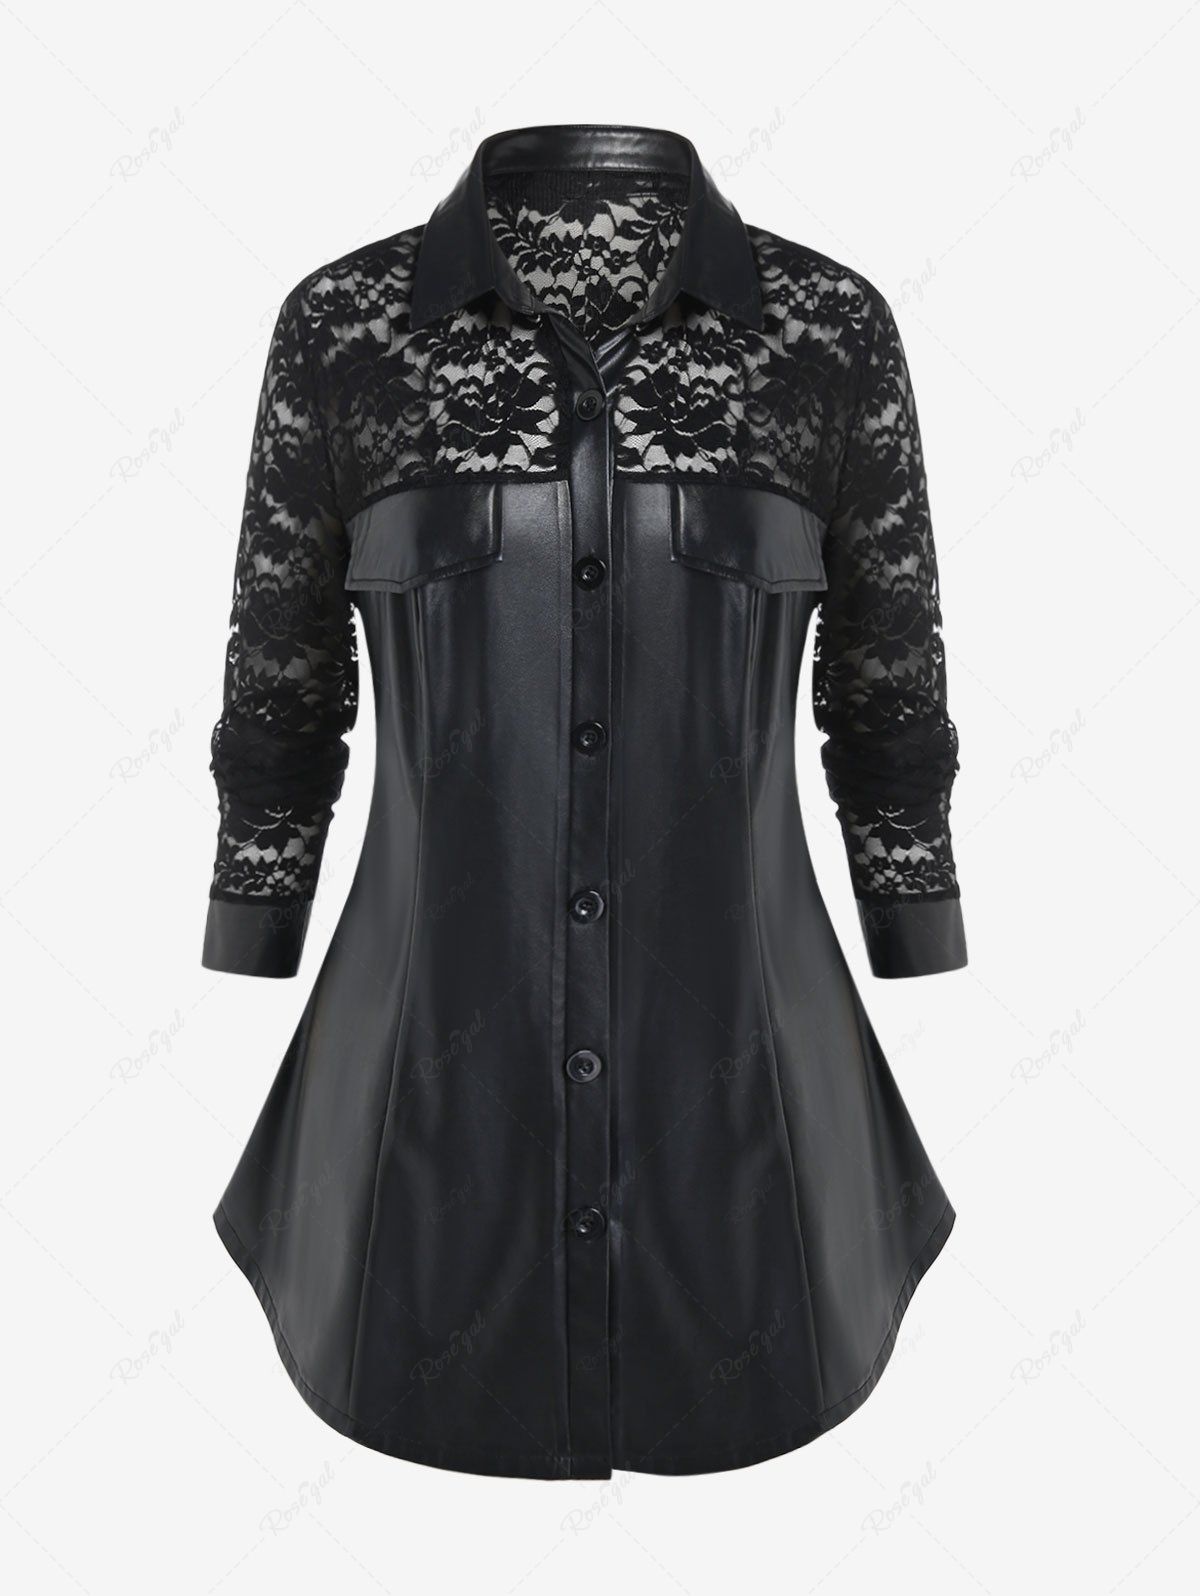 Best Gothic Long Sleeves Faux Leather Shirt with Lace  